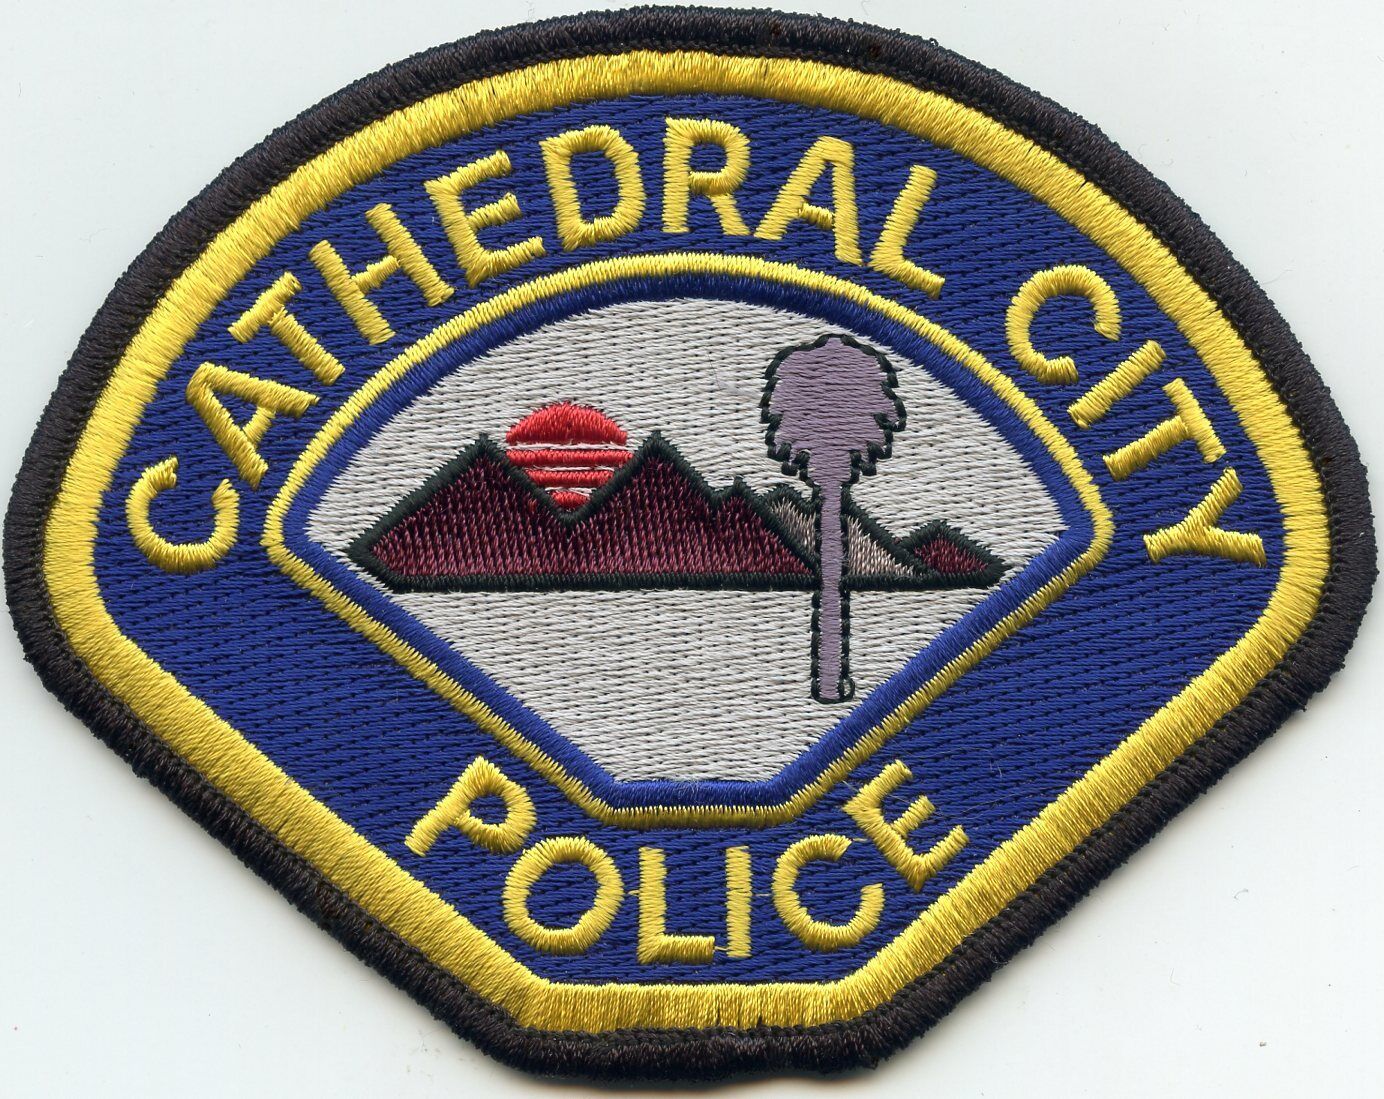 CATHEDRAL CITY CALIFORNIA CA POLICE PATCH